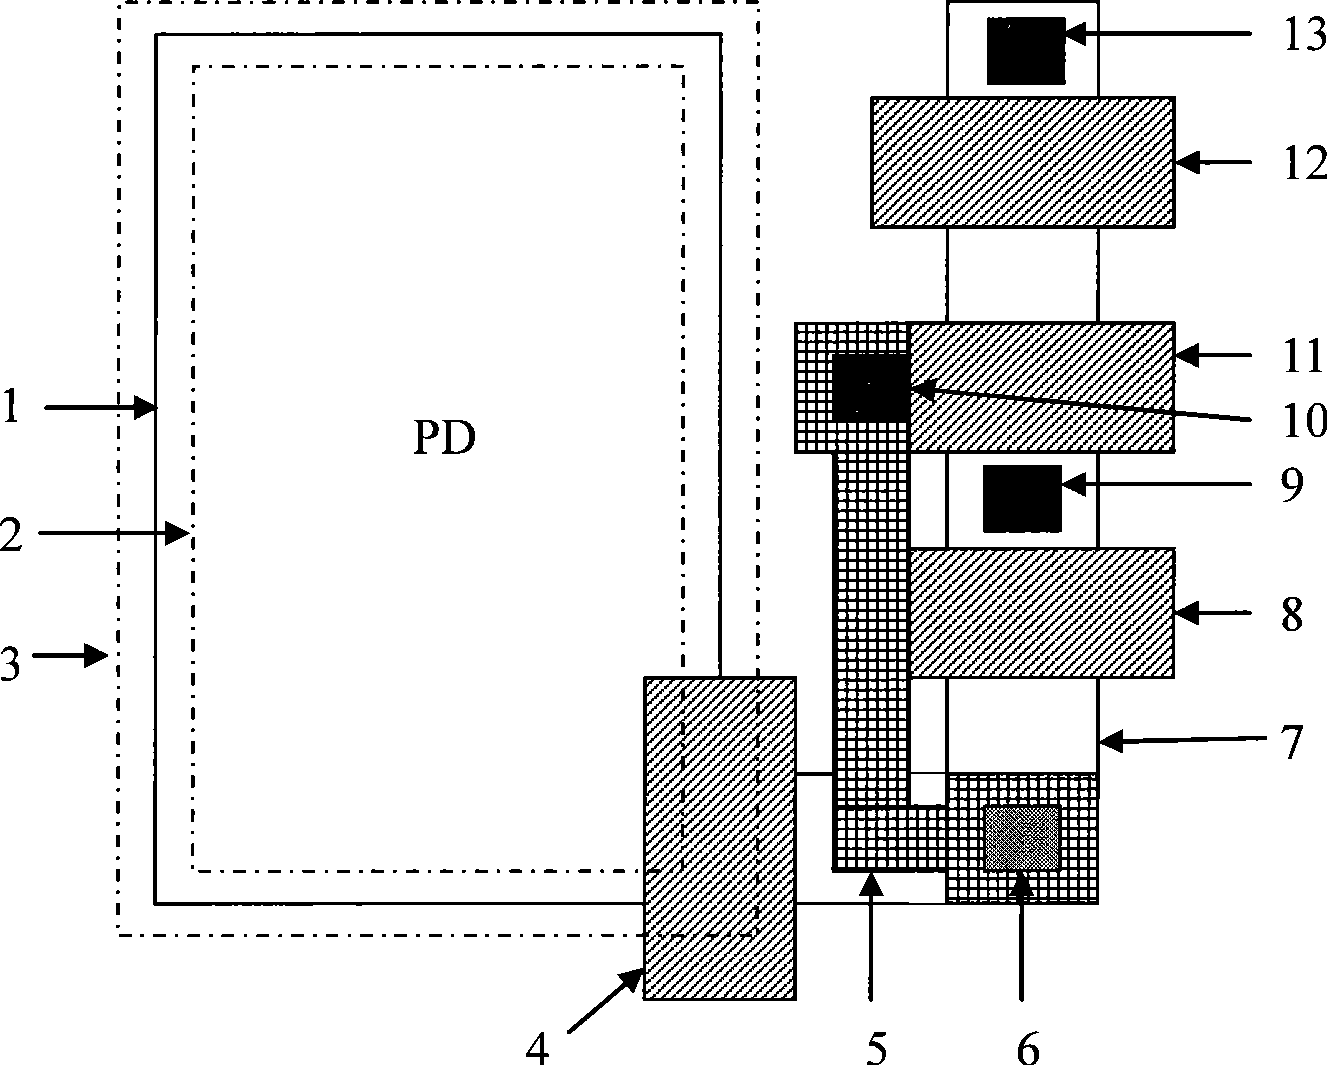 FD active region structure for pixel unit, preparation and CMOS image sensor thereof